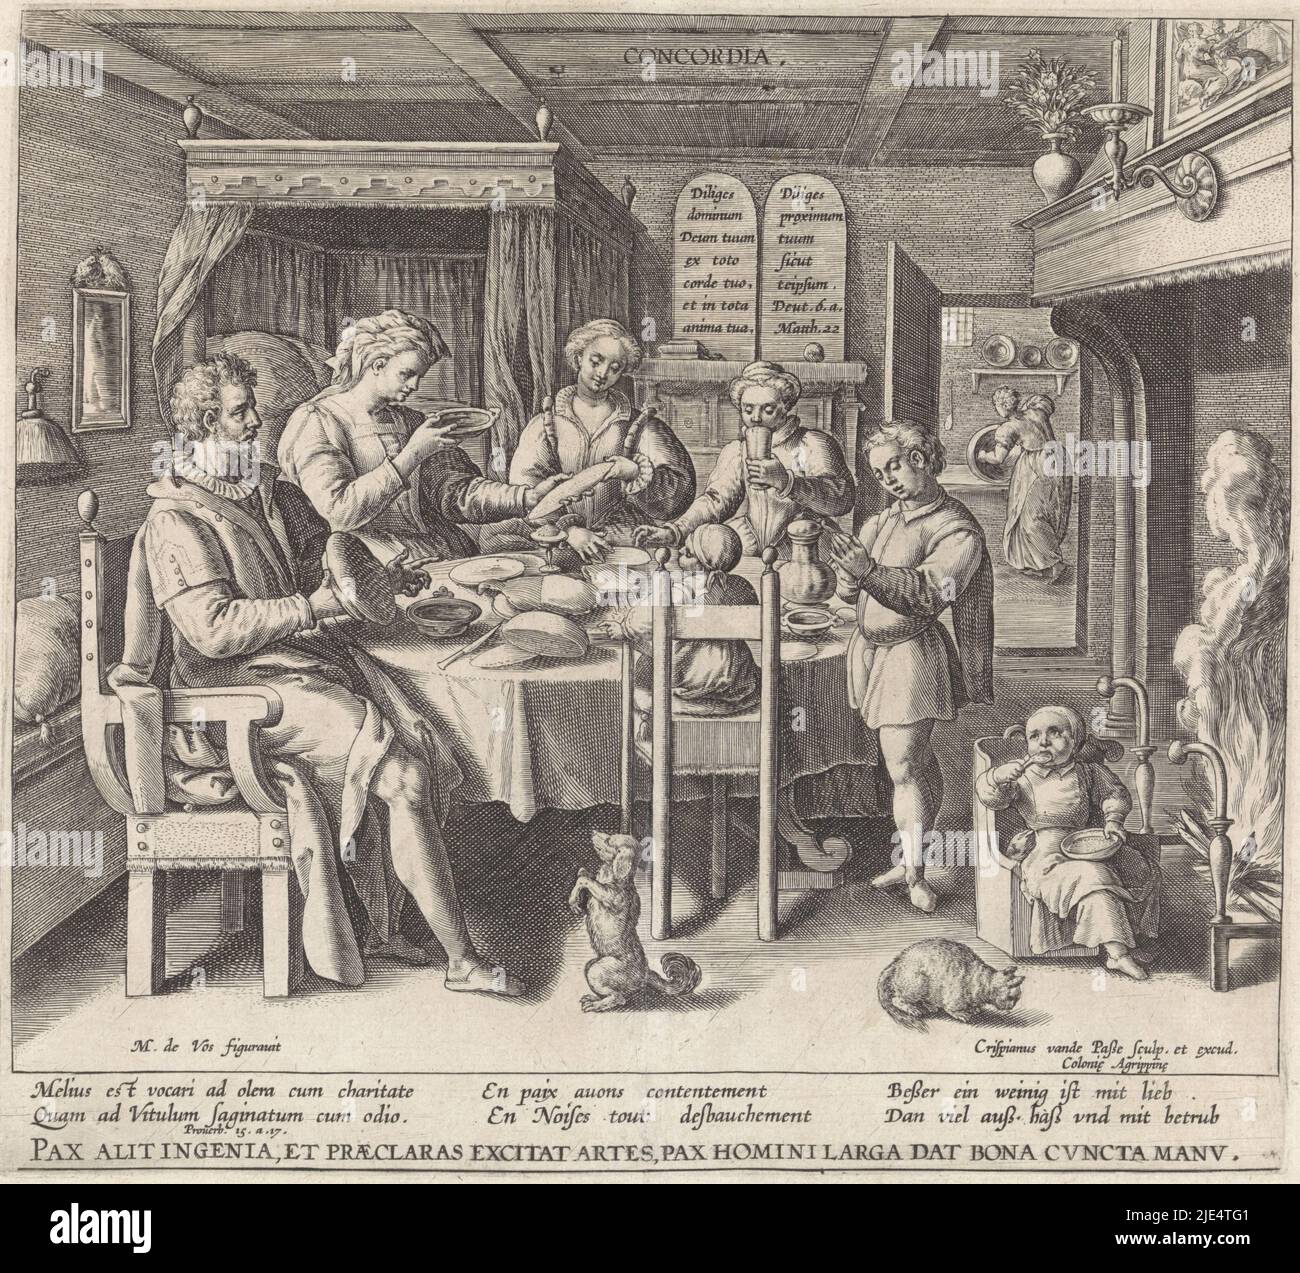 The Imagination of the virtue Eendracht (Concordia): interior with a Christian family at the meal. The father is holding a loaf of bread, the mother a bowl. The three eldest children are standing at the table. The boy has his hands folded in prayer. In front of the fireplace, a small child sits in a high chair. In the foreground a begging dog and a cat. On a cupboard against the back wall of the room are the tables of the law with bible quotes in Latin from Deut. 6 and Mat. 22. In the margin a six-line Bible quote from Spr. 15-17 and a motto in Latin. Counterpart of a print with the bad Stock Photo